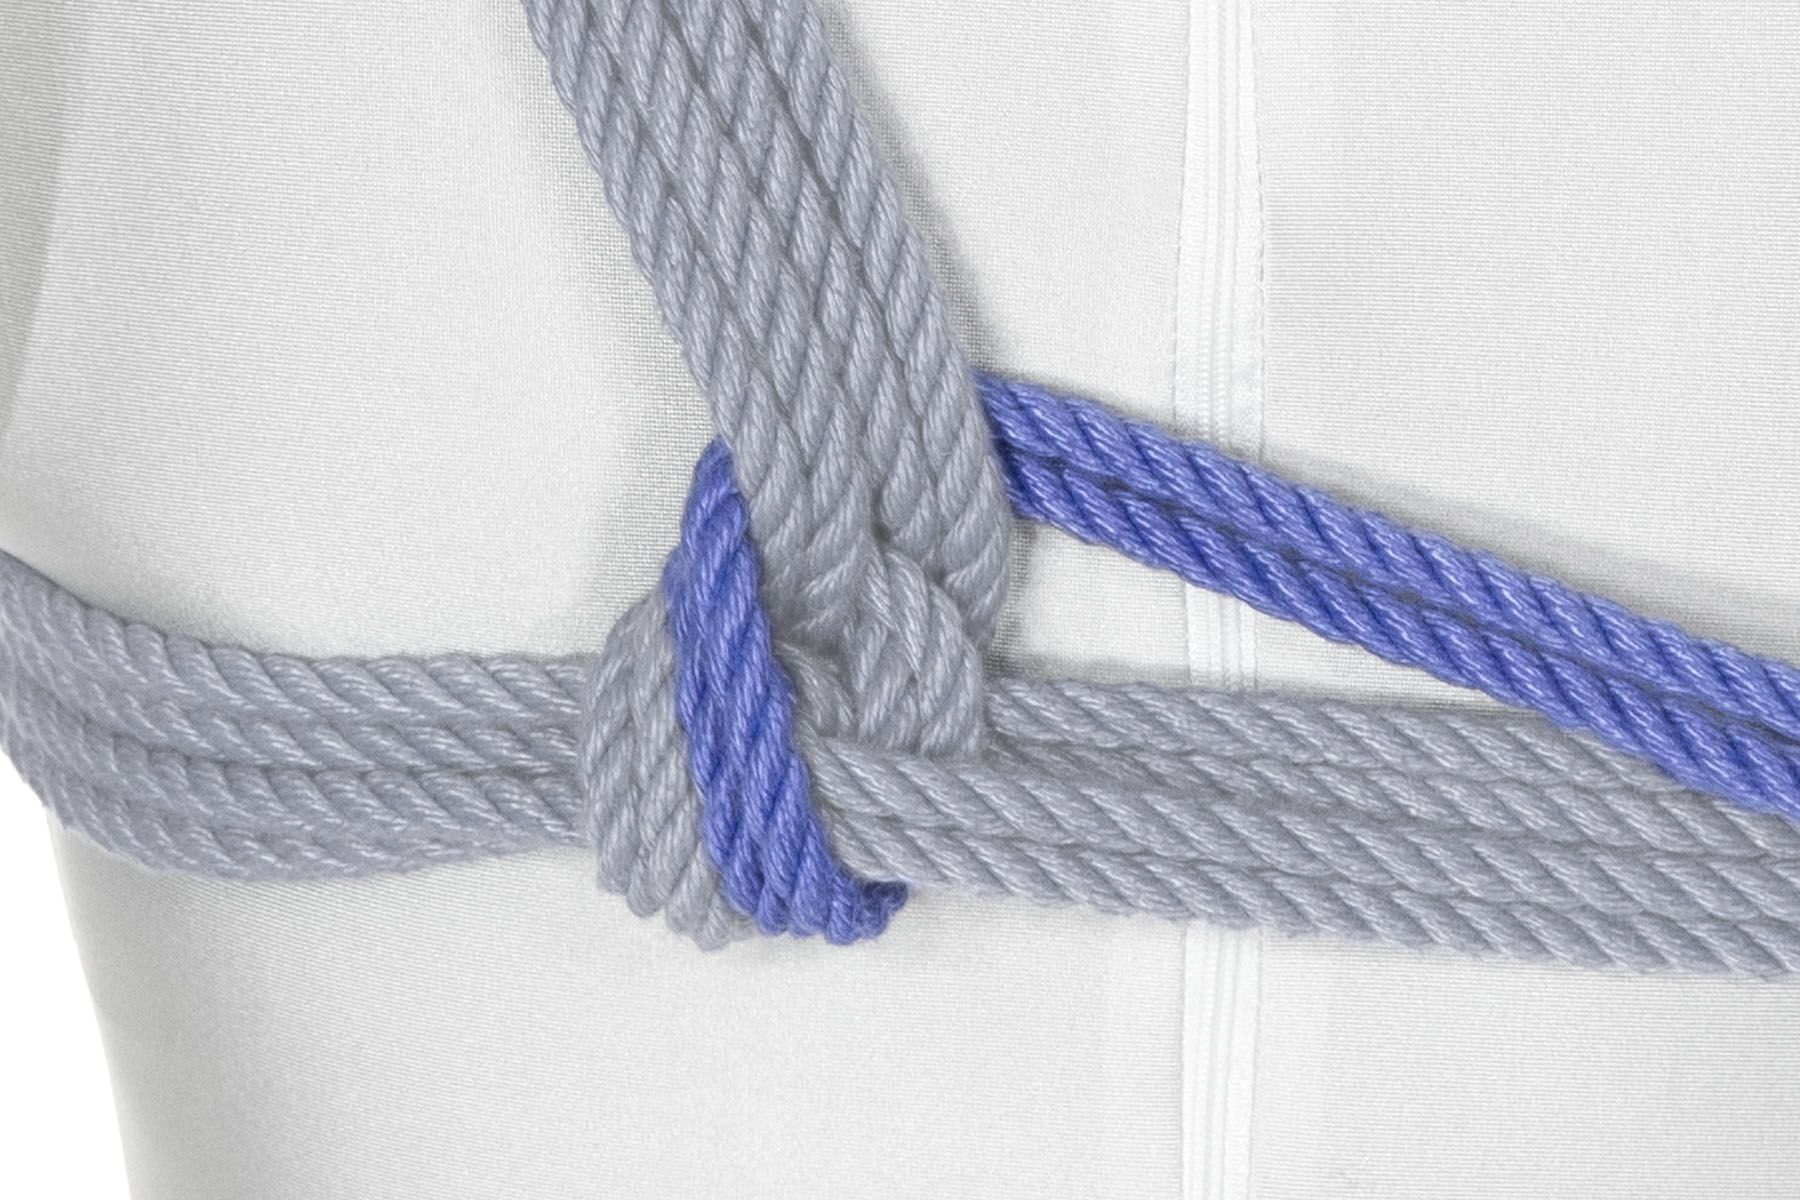 The rope comes over the chest wraps just to the left of the shoulder lines and crosses under the shoulder lines, travelling to the right. The tension on the rope locks the shoulder lines to the chest wraps.